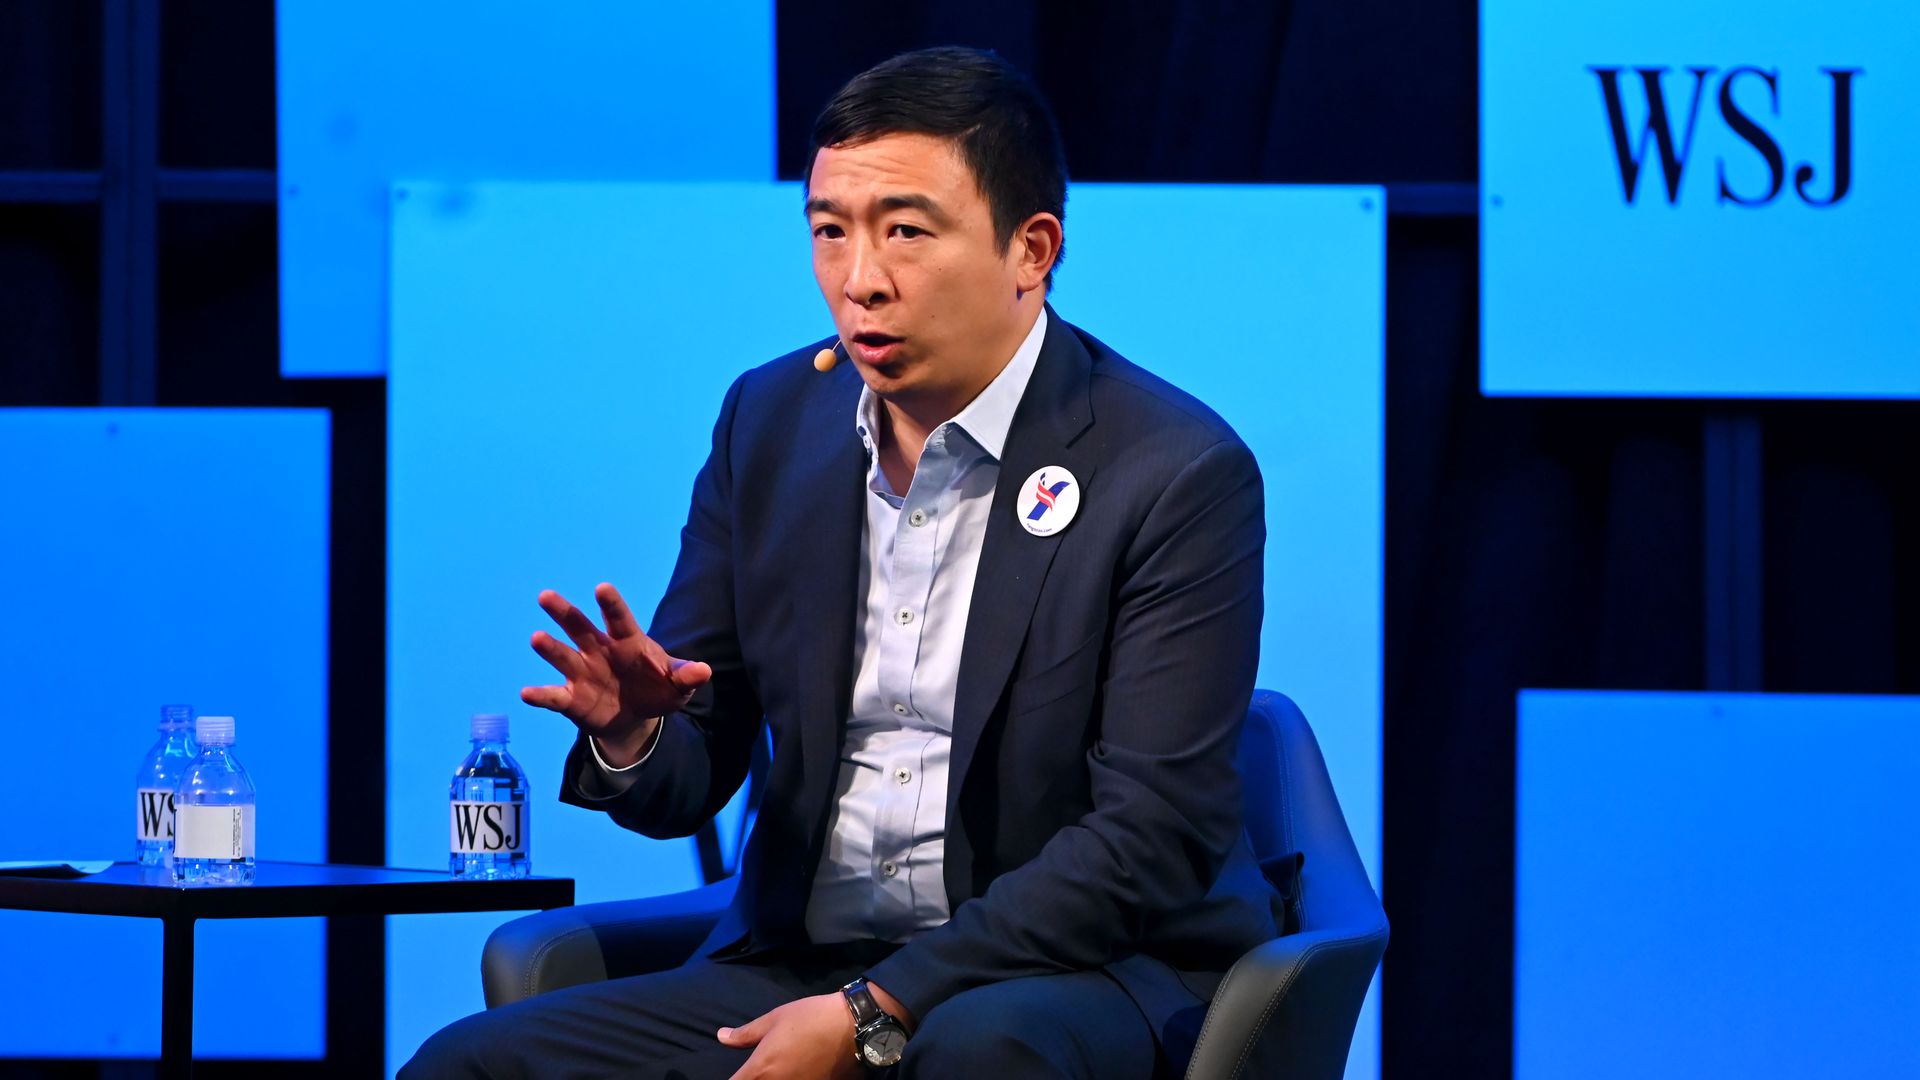 Andrew Yang sitting in a chair while extending his hand forward. he is wearing a suit, Yang button and in front of some Wall Street Journal graphics. 